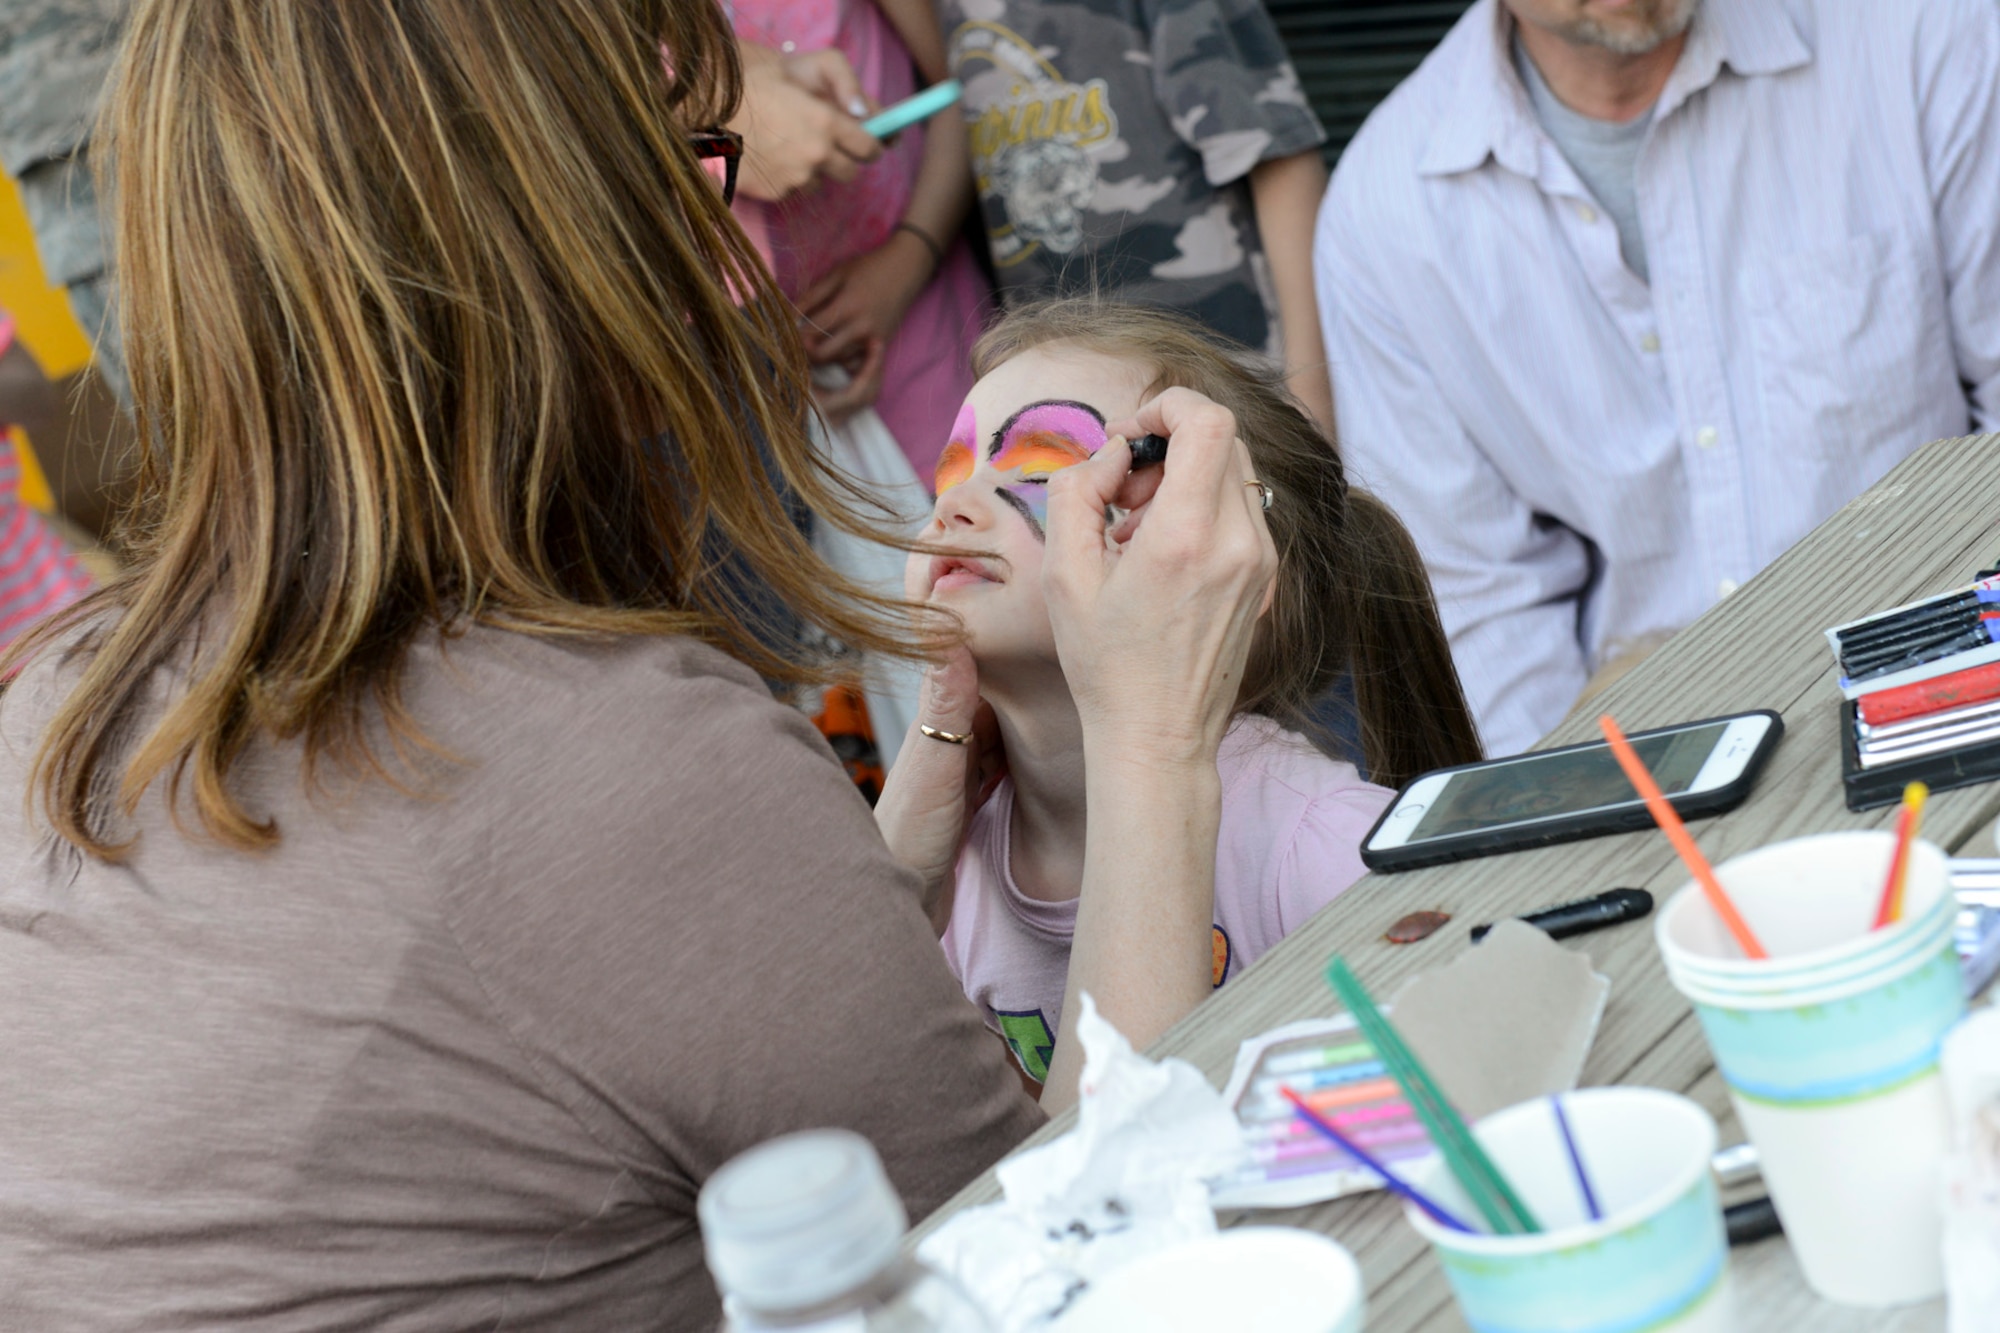 Tricia, daughter of Sarah and Staff Sgt. Chris Thorsbakken, gets her face painted at the 2015 Annual Easter Egg Hunt held outside of the Dining Facility of the 132d Wing, Des Moines, Iowa on Saturday, April 11, 2015.  (U.S. Air National Guard photo by Staff Sgt. Linda K. Burger/Released)